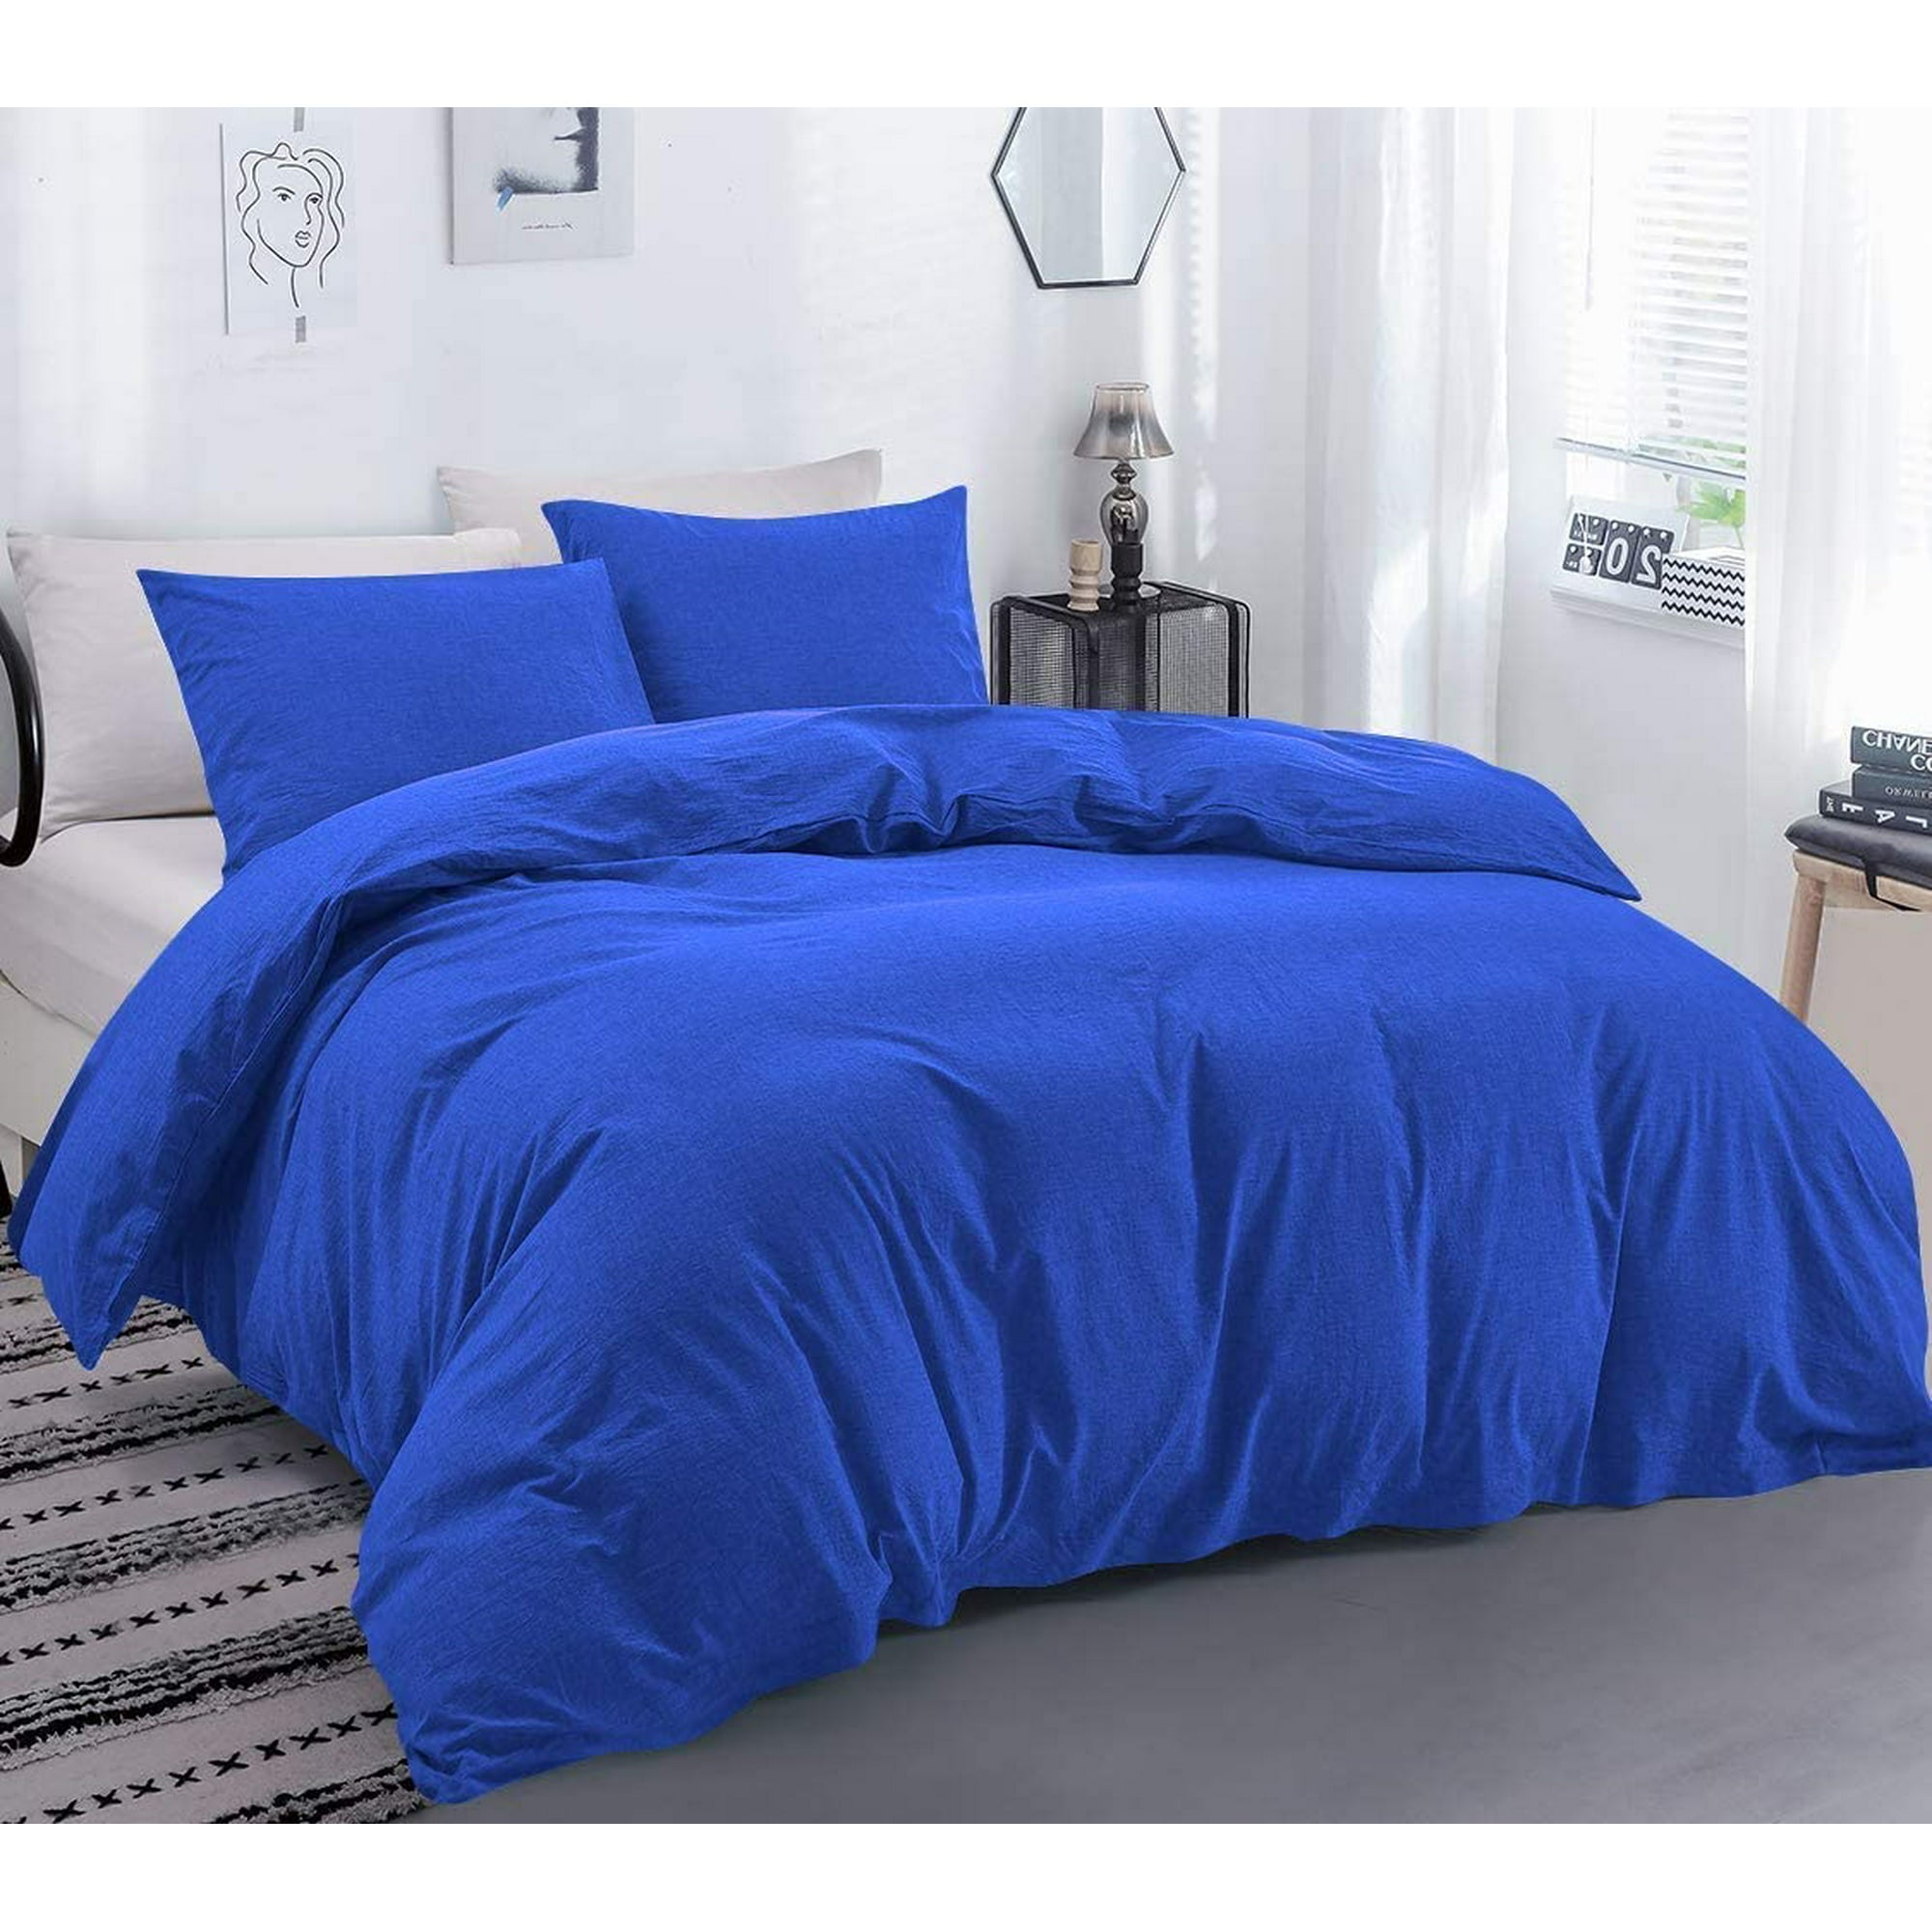 600 Thread Count Egyptian Cotton 3-PCs Duvet Cover Set { Button Closure } King/Cal-King, Royal Blue Solid